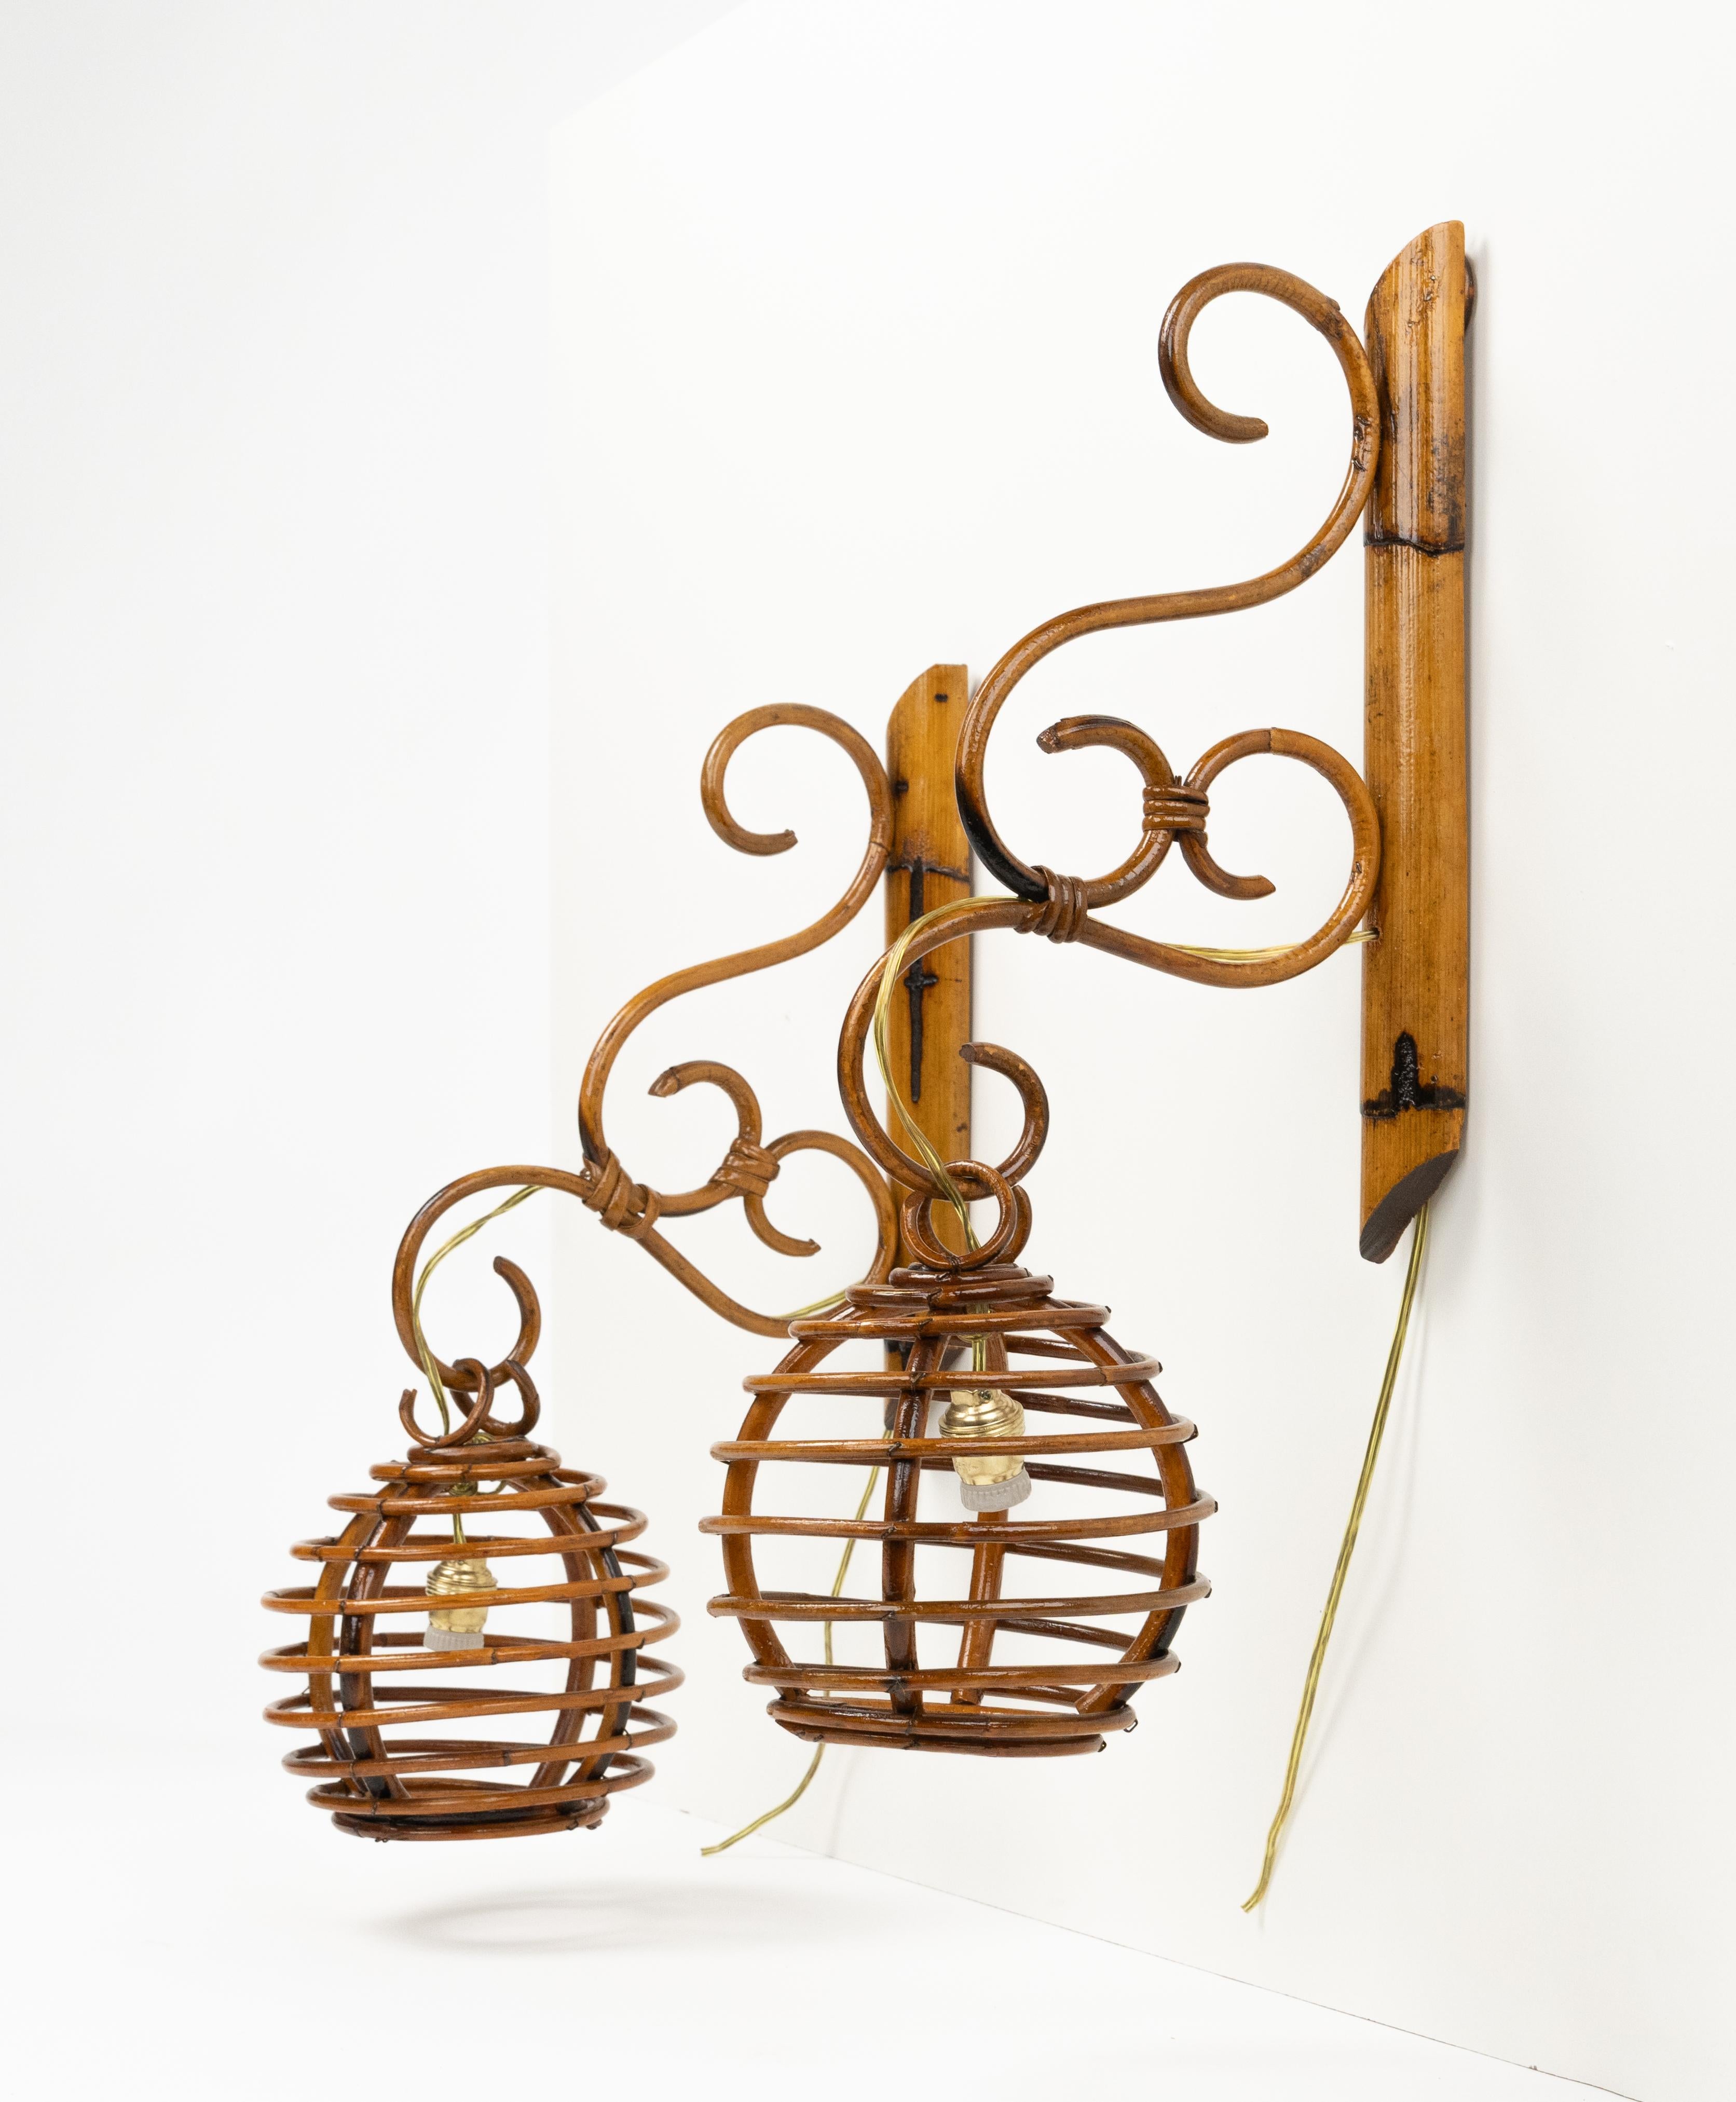 Italian Midcentury Pair of Sconces in Bamboo and Rattan Louis Sognot Style, Italy 1960s For Sale